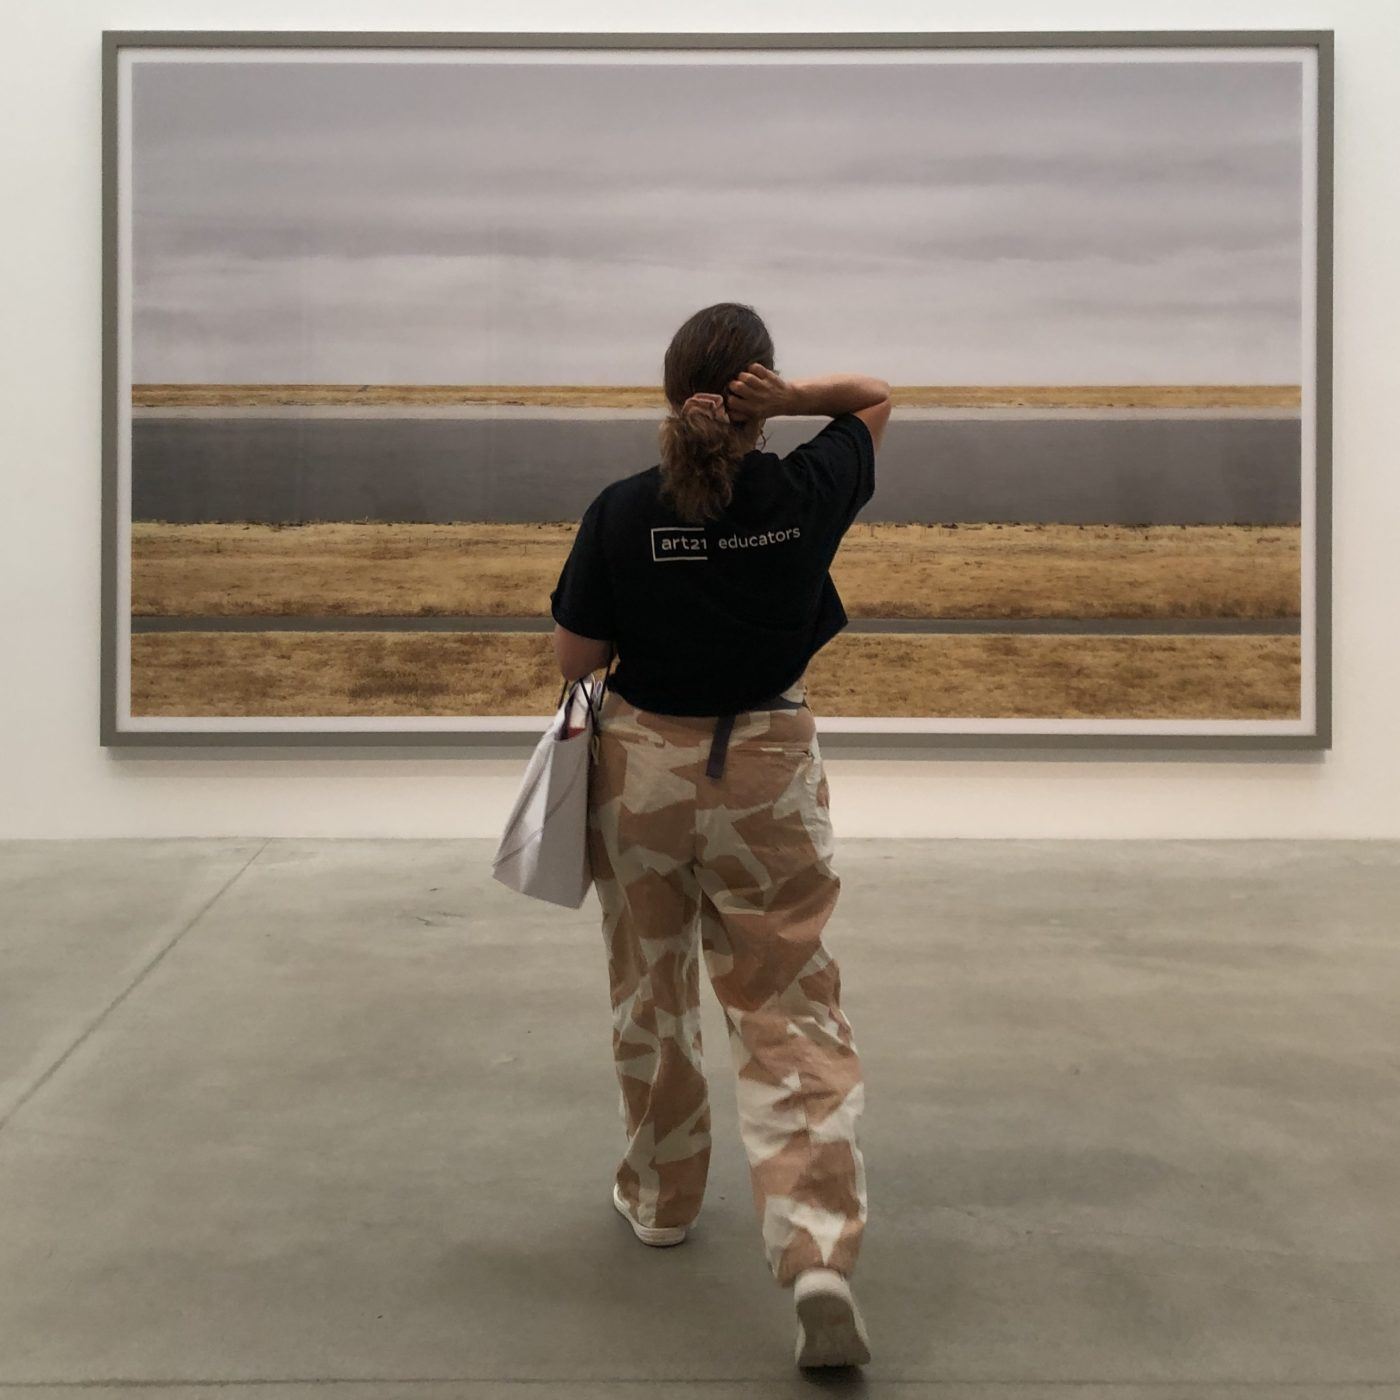 Woman with her arm raised to her head, wearing tan patterned pants and a black Art21 Educators t-shirt standing in front of a large-scale image of a road and gray sky.